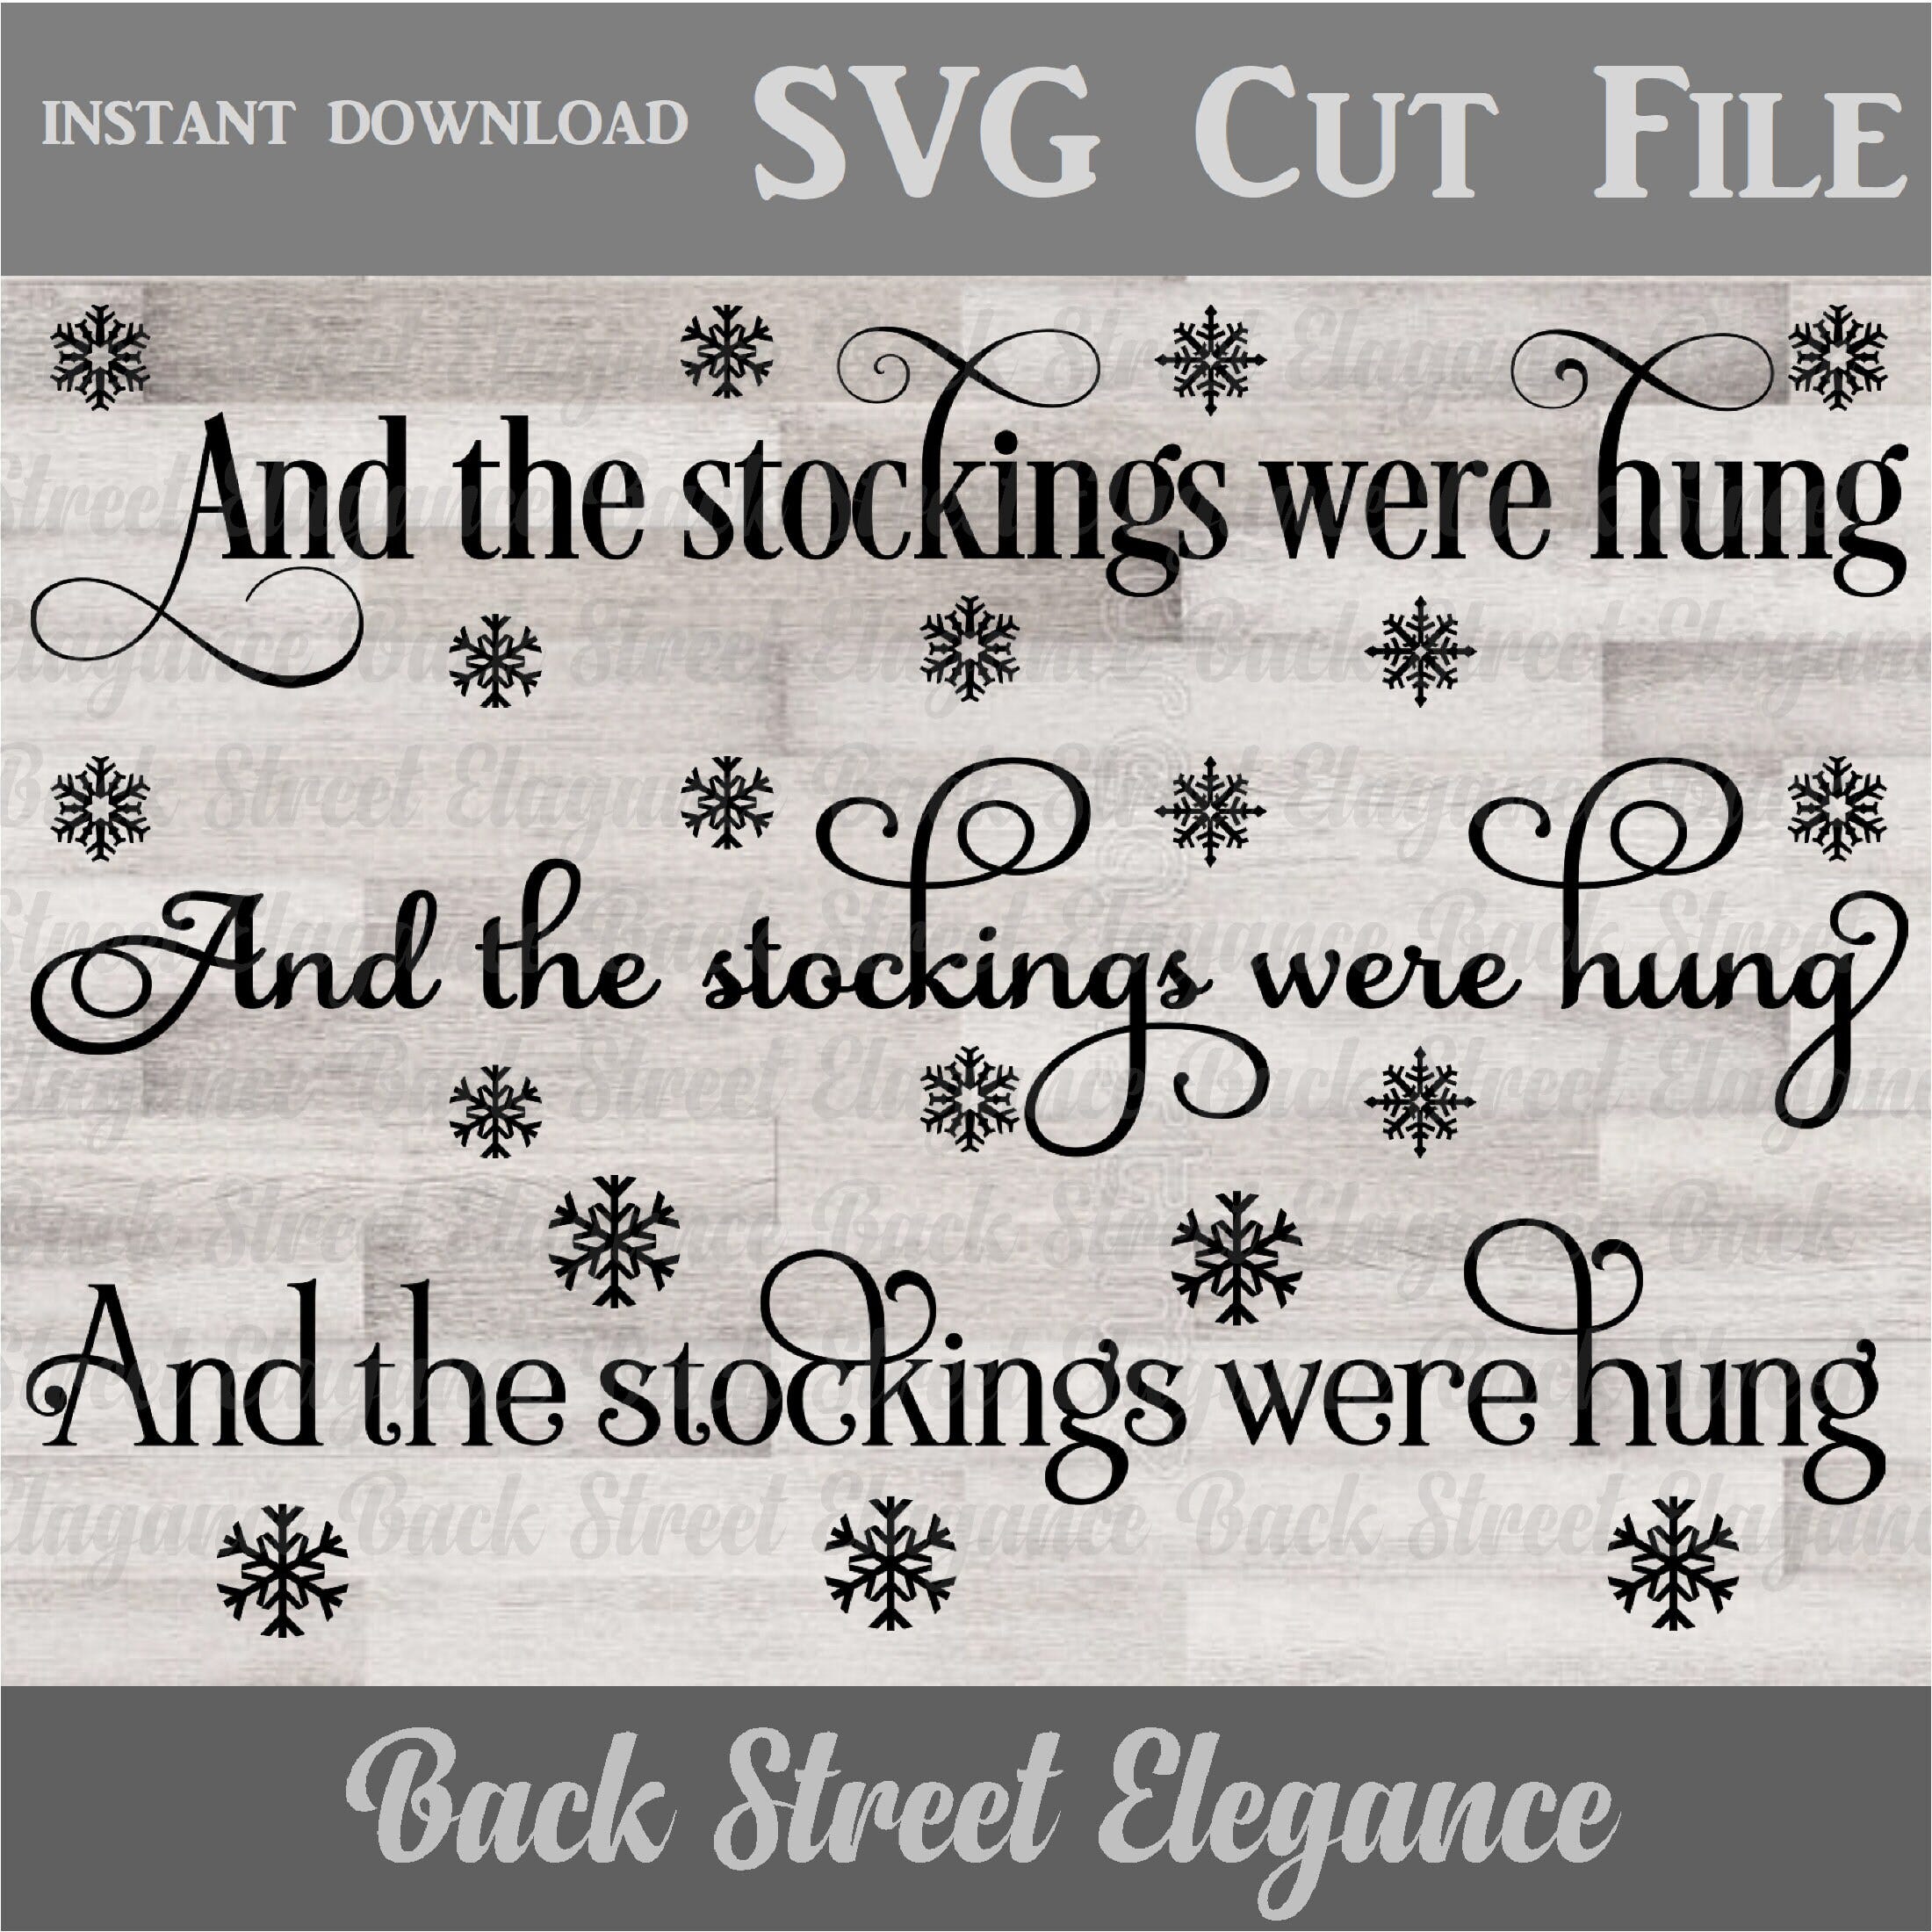 And The Stockings Were Hung SVG - Cut File - Three Designs - Christmas - Wood Sign - Vinyl Decal